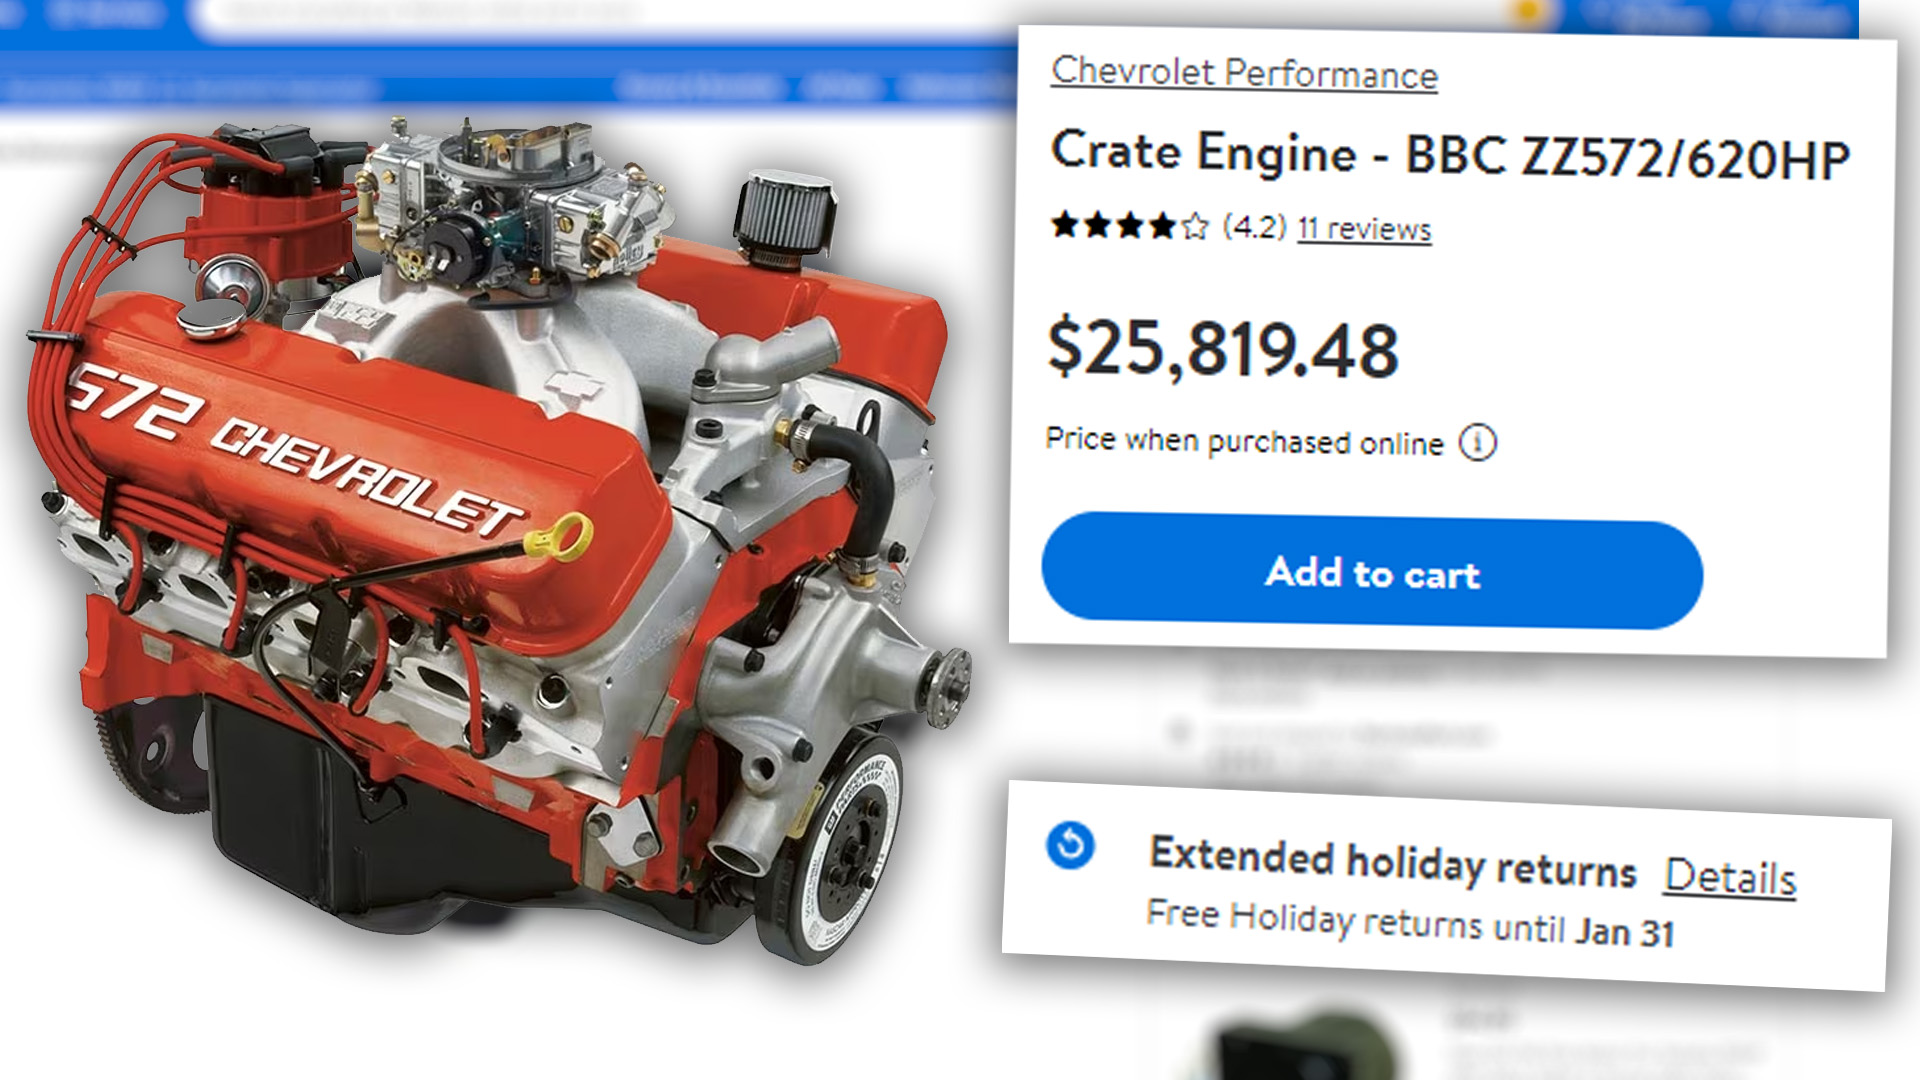 You Can Buy a Chevy Big-Block V8 Crate Engine From Walmart—With Free Returns